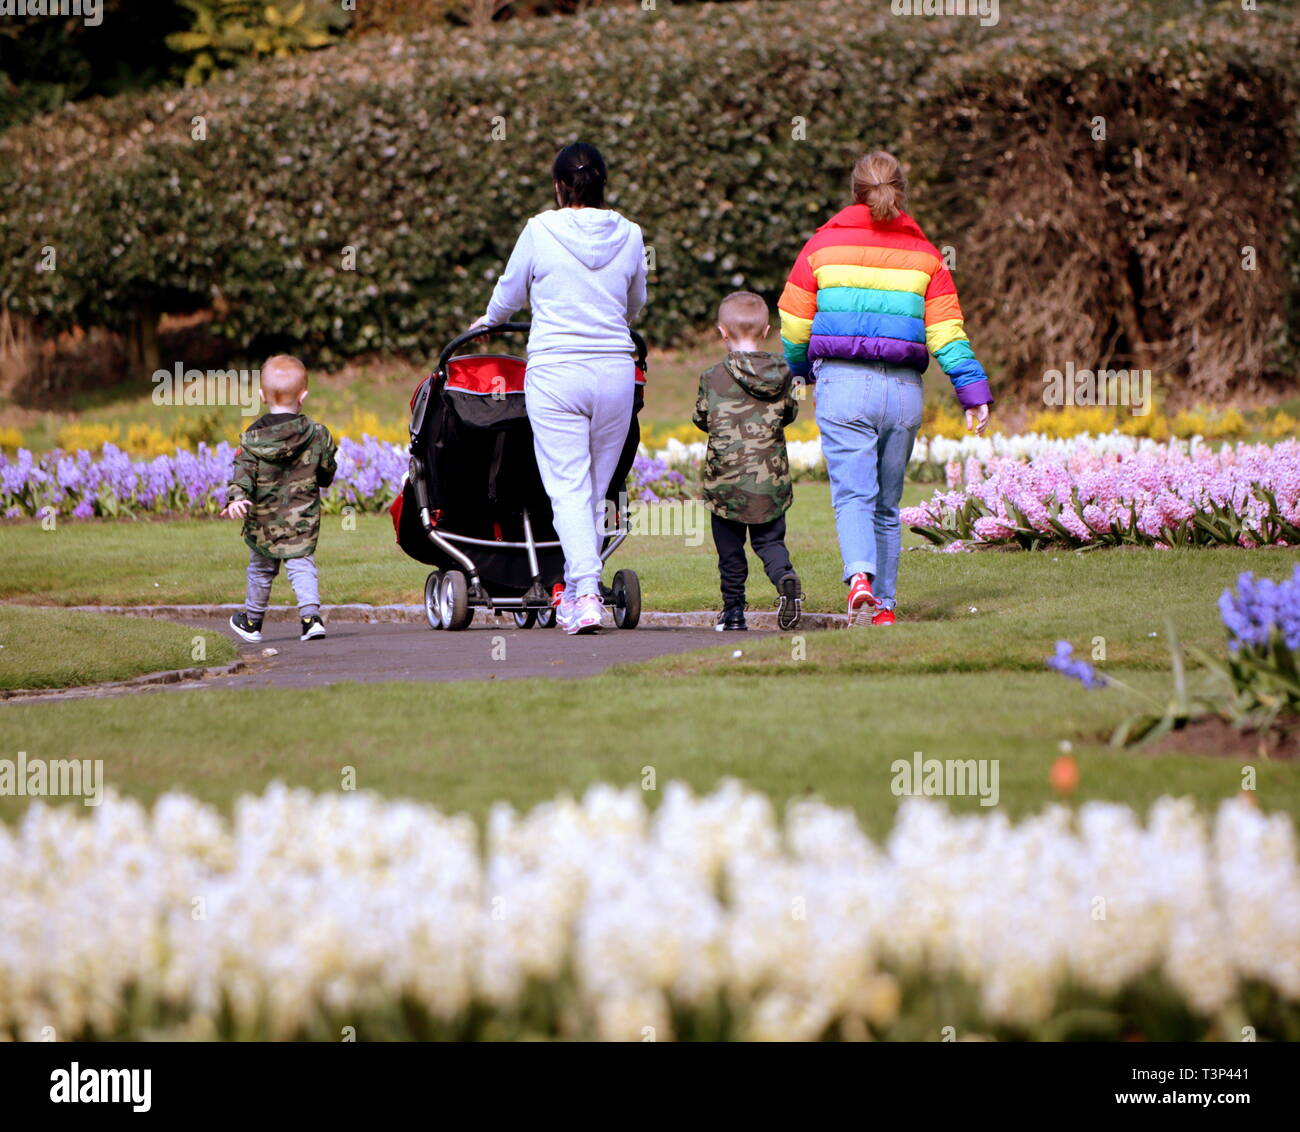 Glasgow, Scotland, UK. 11th Apr, 2019. UK Weather: Sunny summer day in Victoria Park as the city's green spaces flower displays hit their peak in the bright sunshine and high temperatures in the city centre. Credit: gerard ferry/Alamy Live News Stock Photo